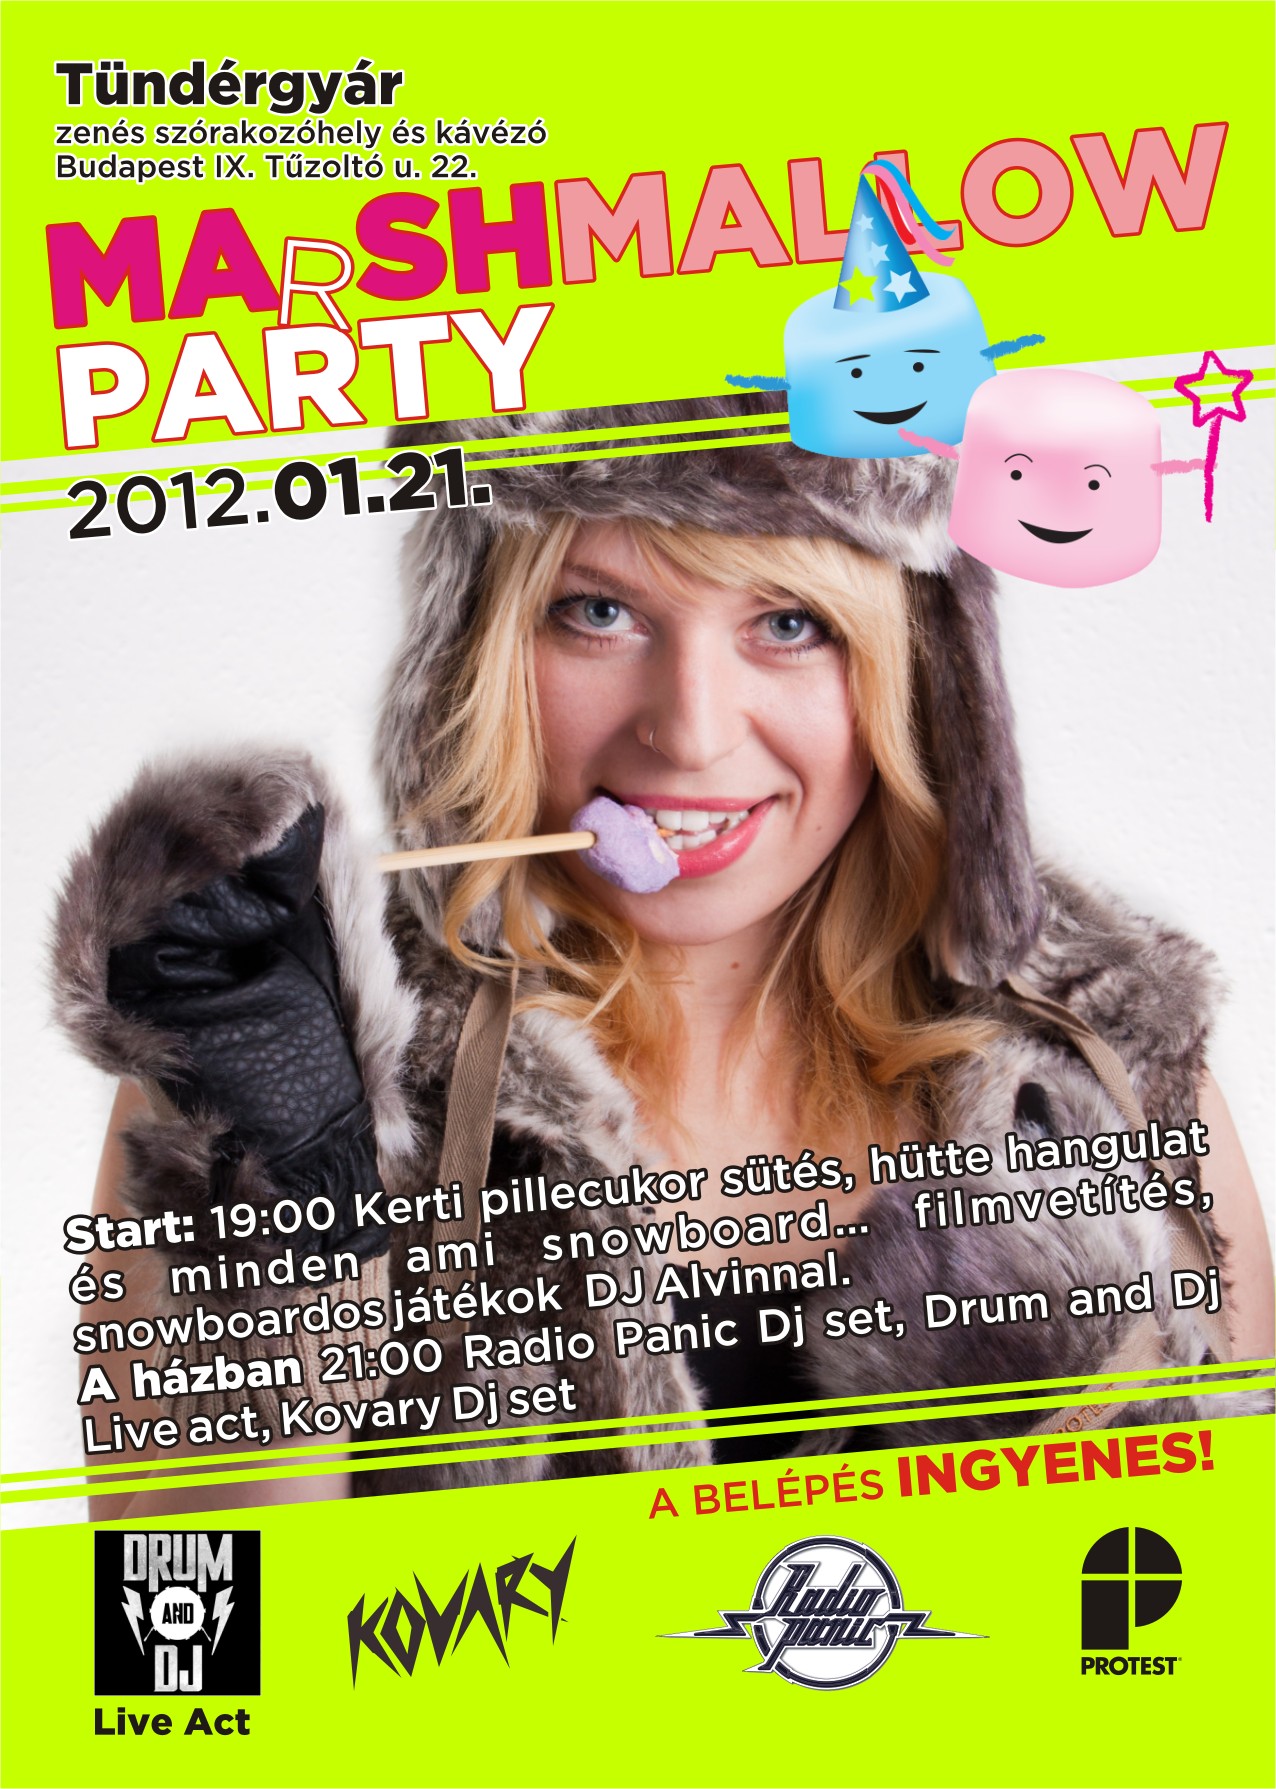 MArSHMALLOW Party + drum 'n' dj live act